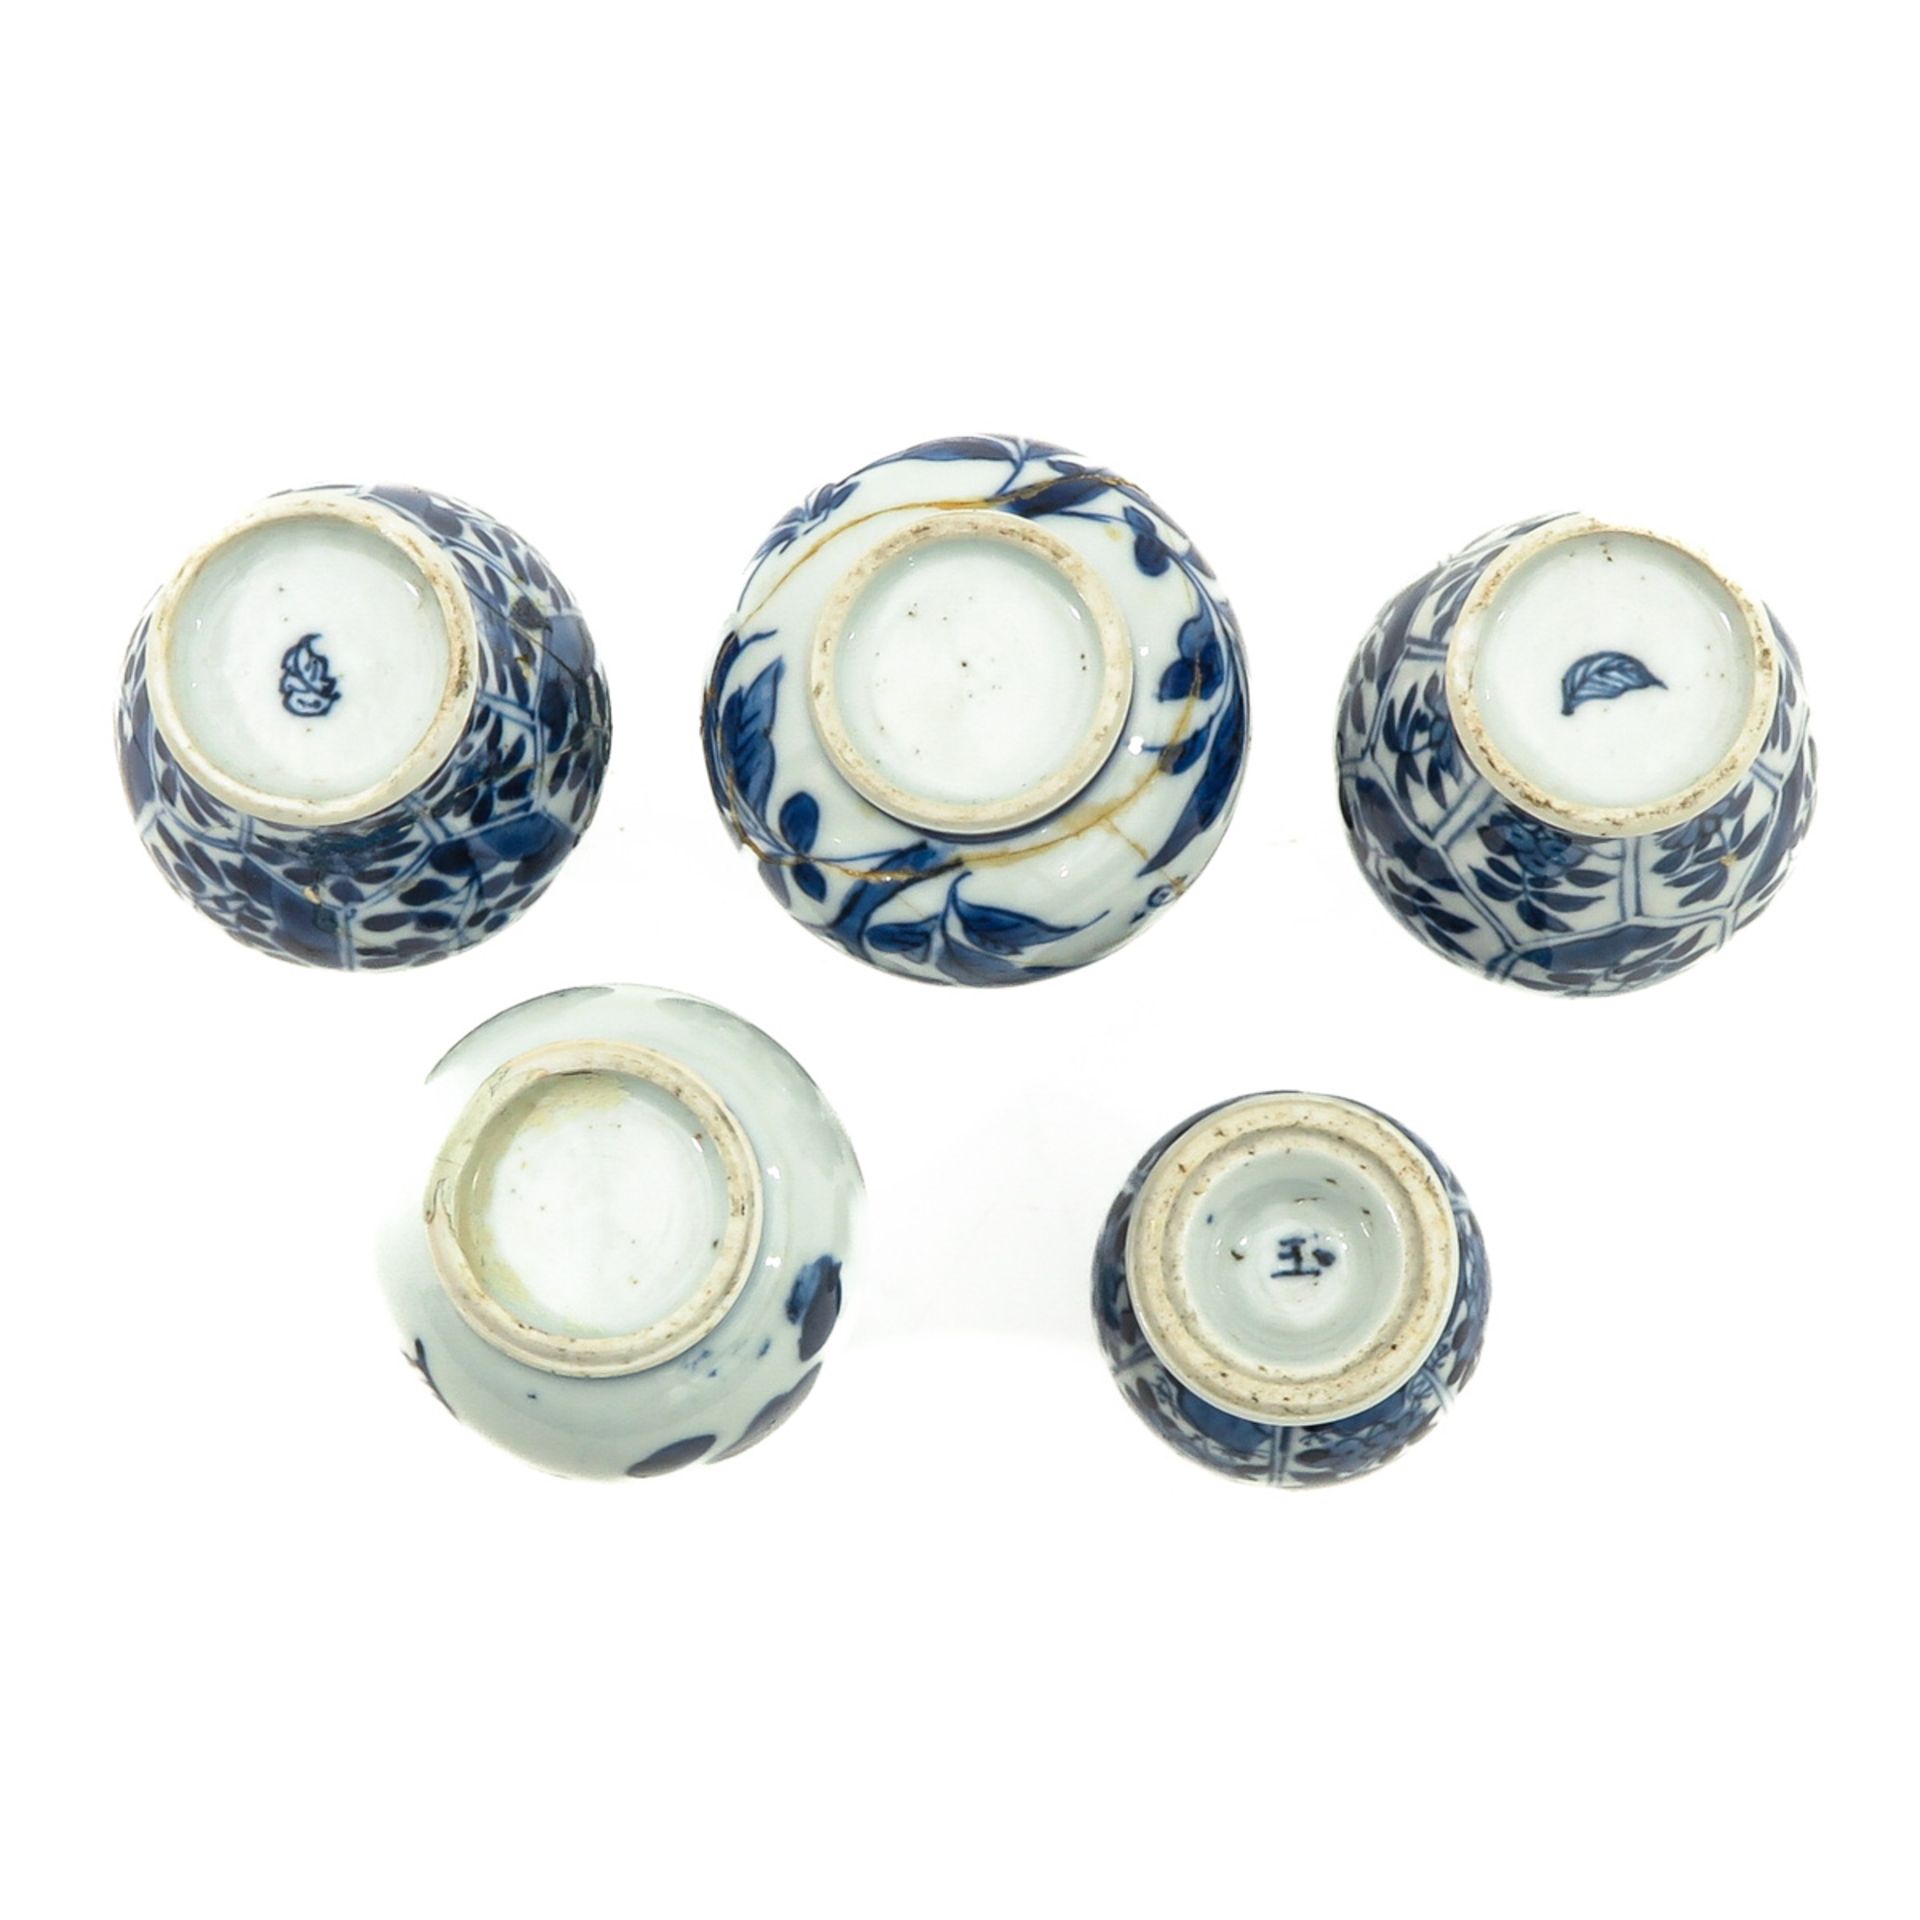 A Collection of 5 Miniature Vases - Image 6 of 9